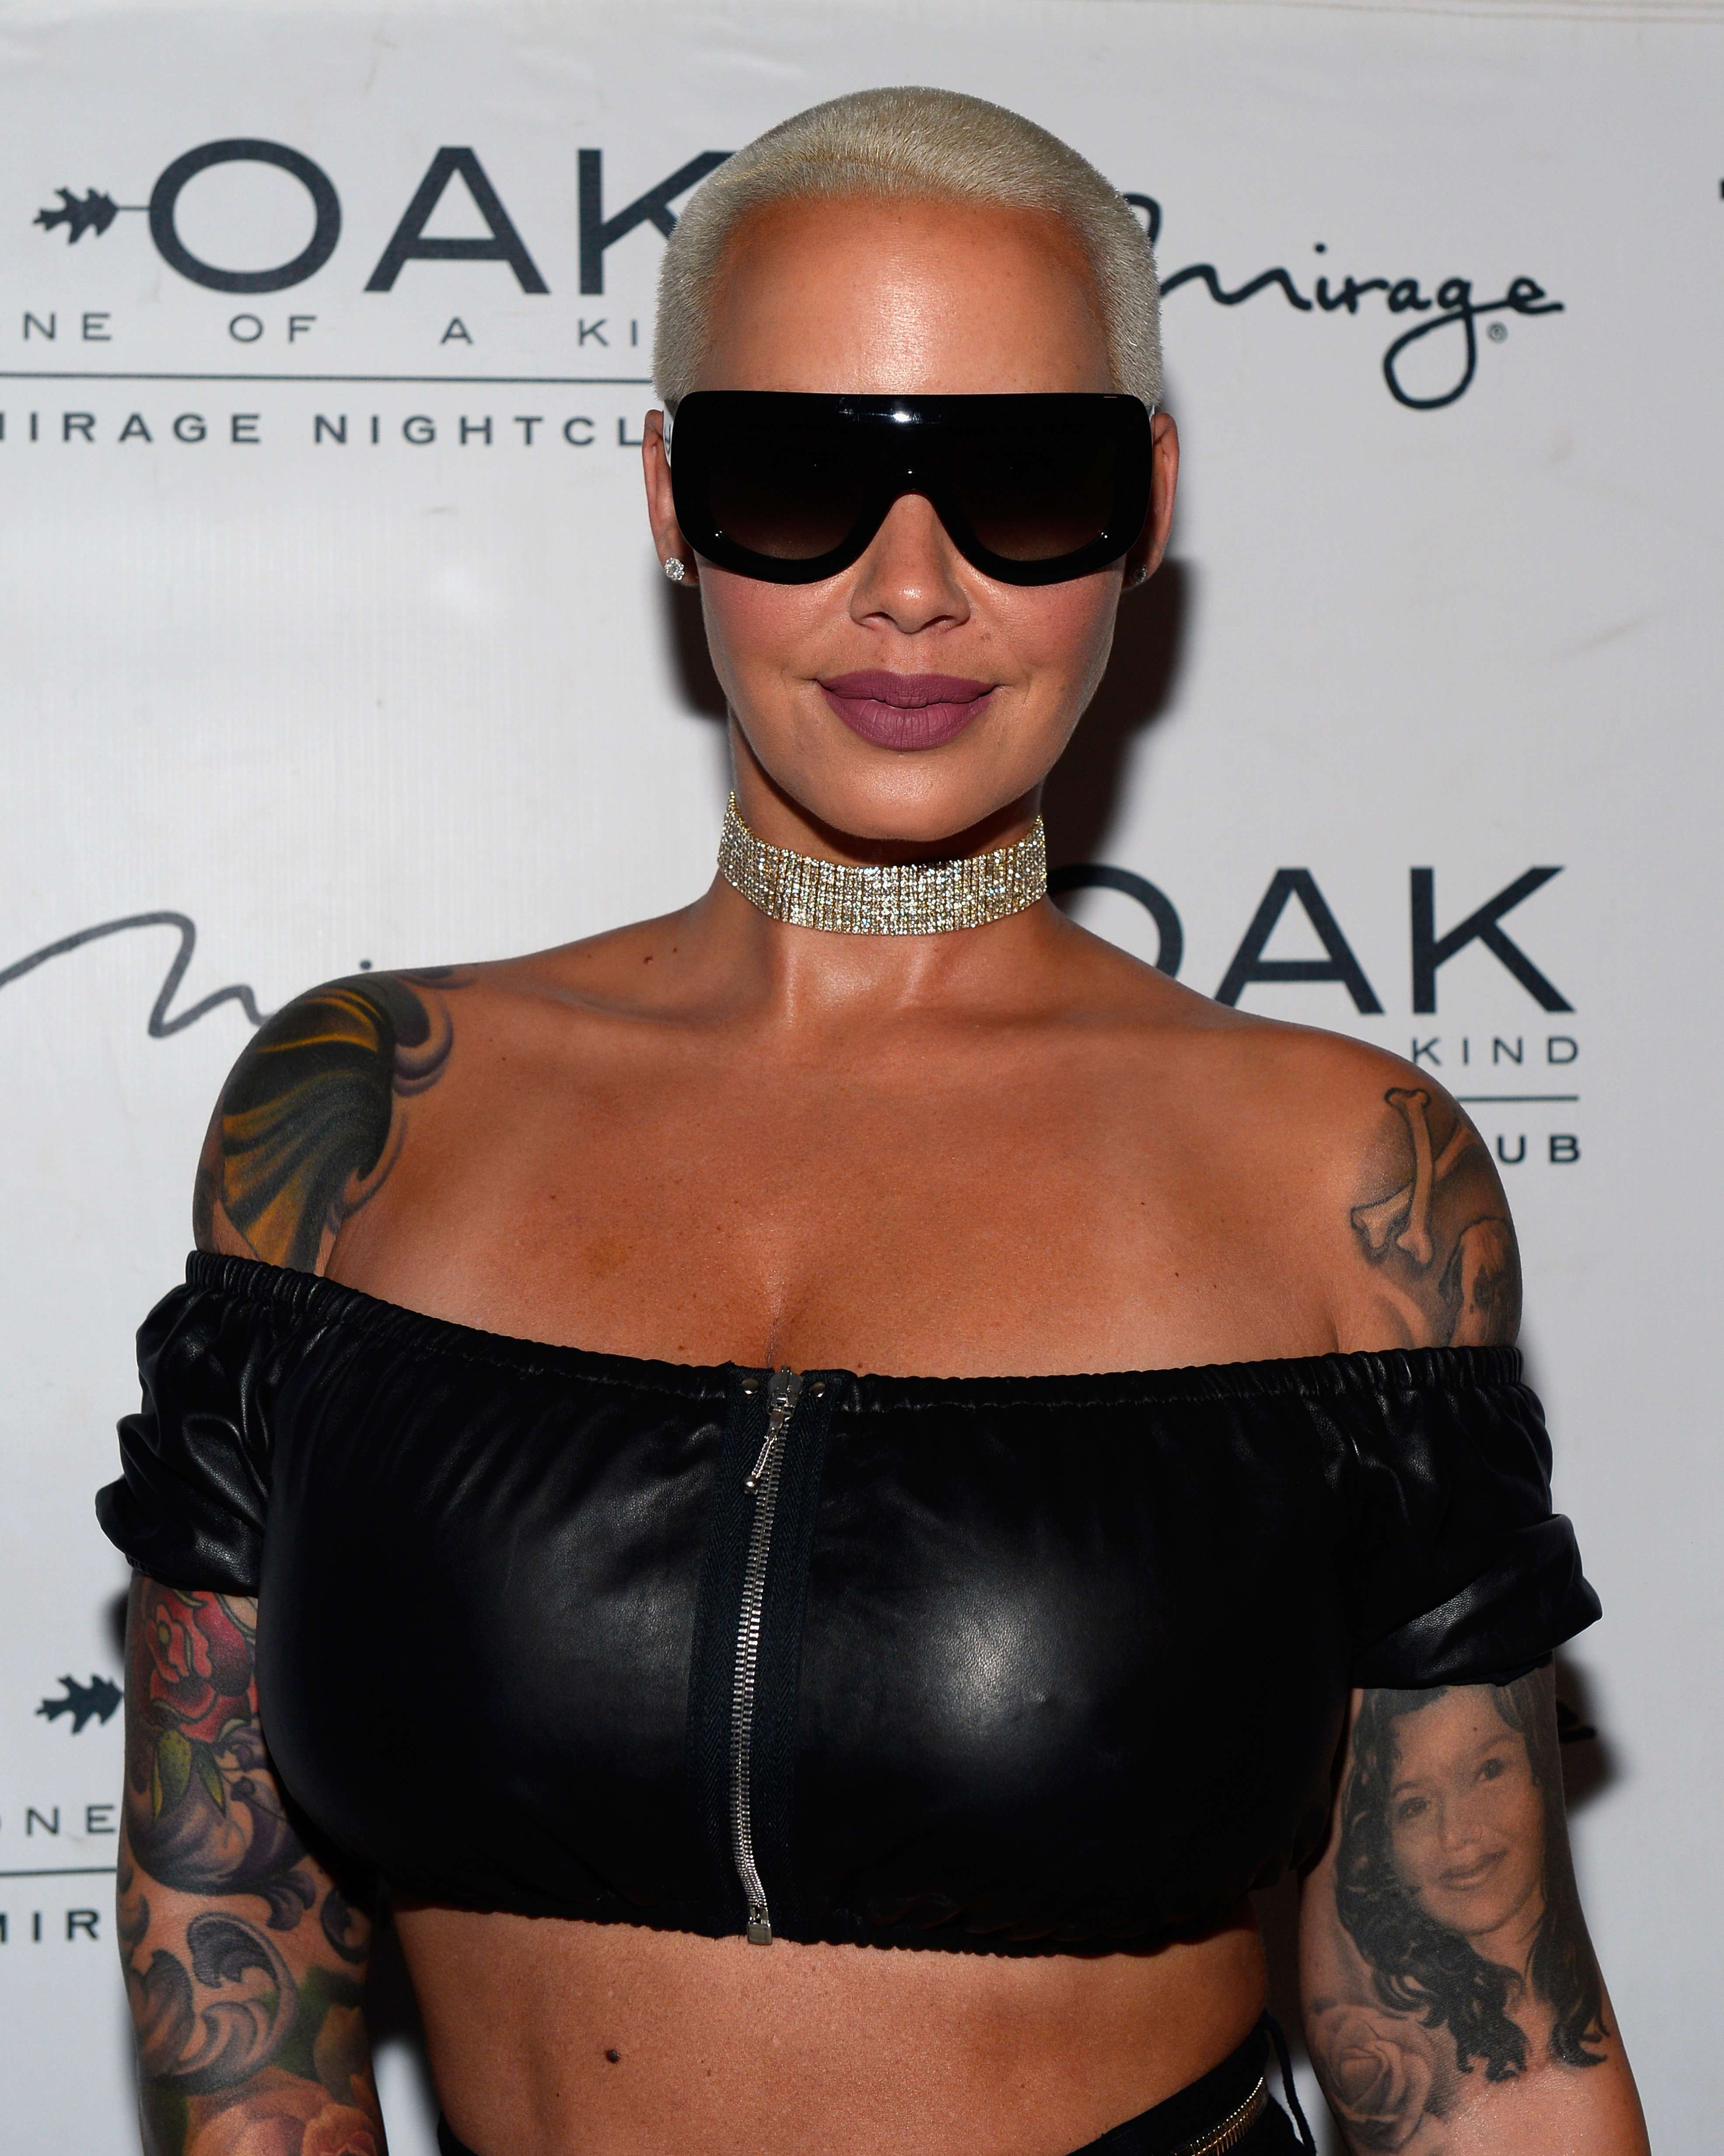 boy sunny recommends amber rose bush nude pic